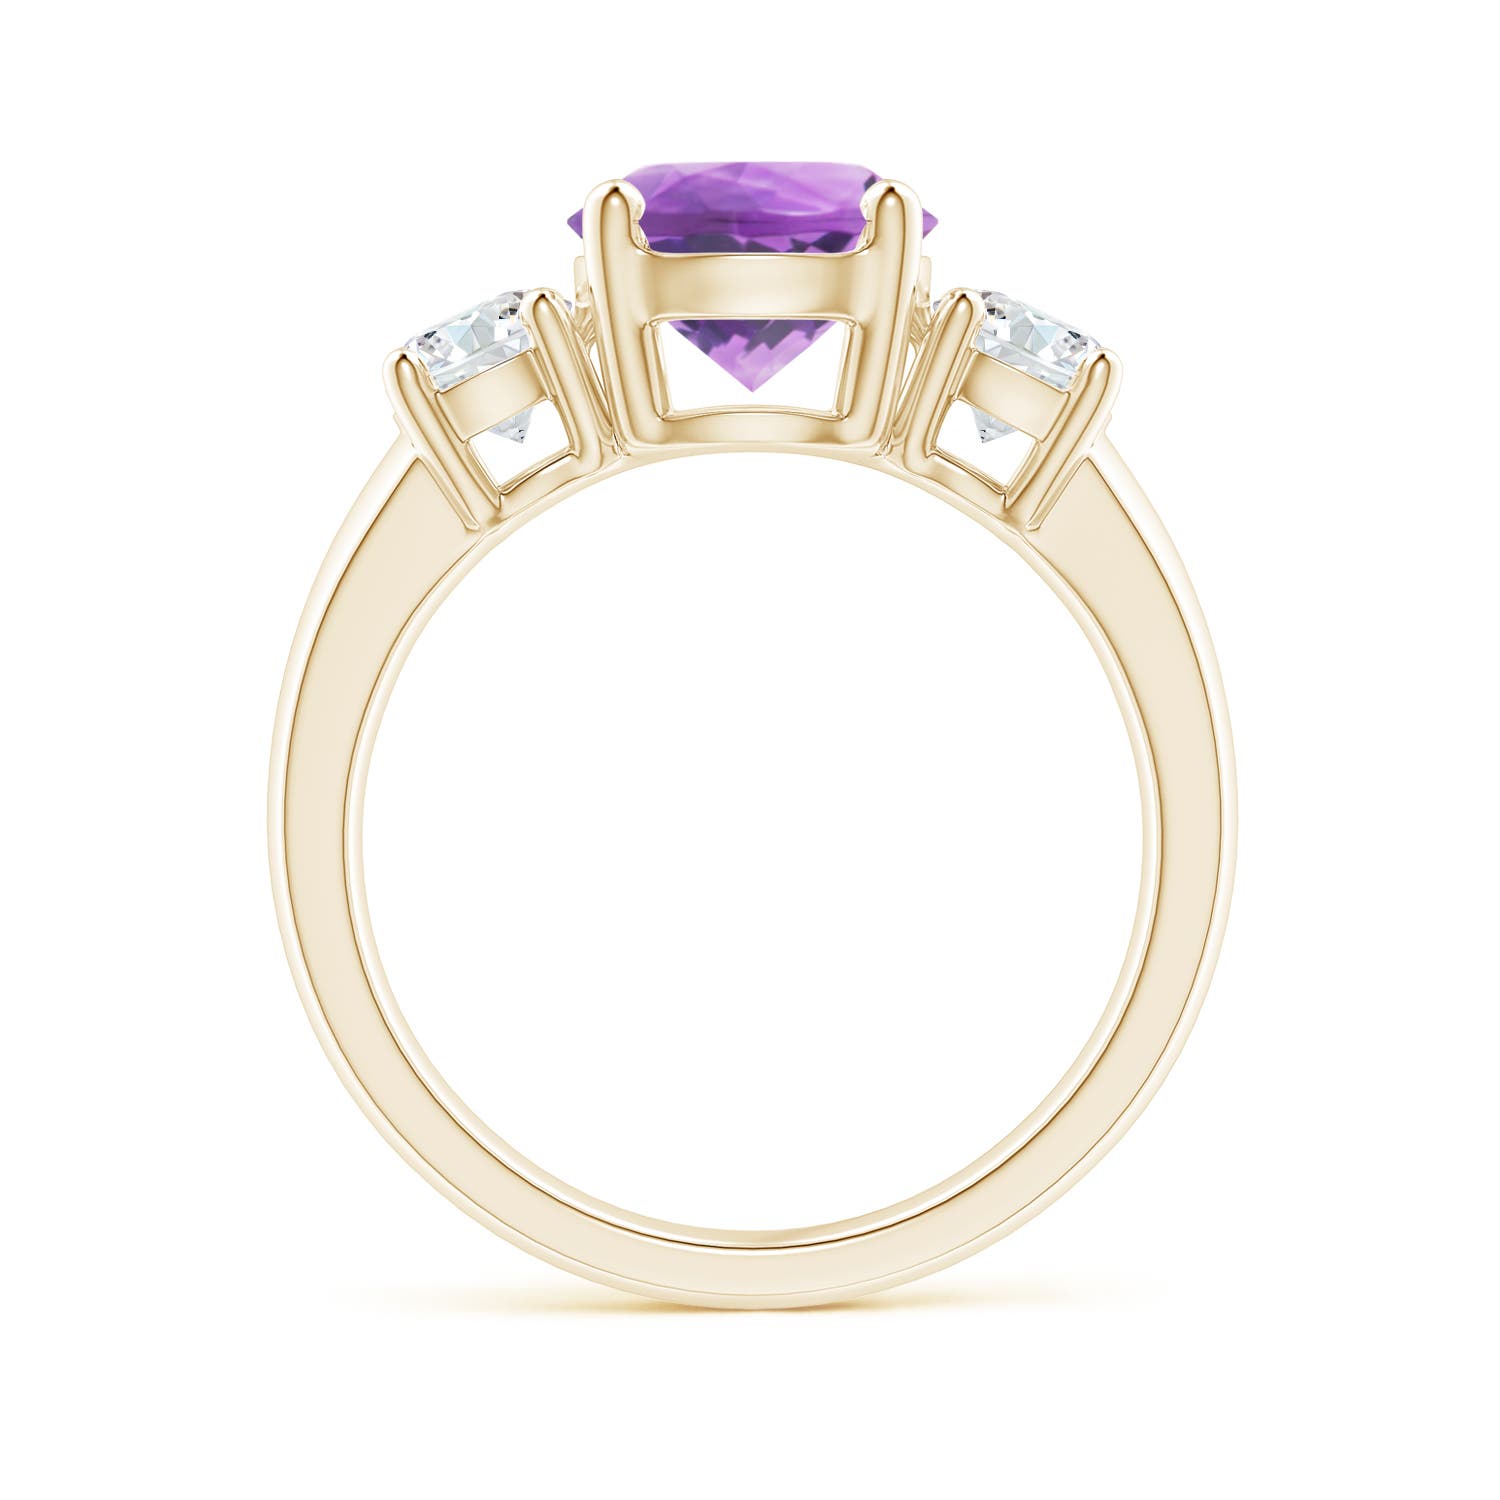 A - Amethyst / 2.4 CT / 14 KT Yellow Gold